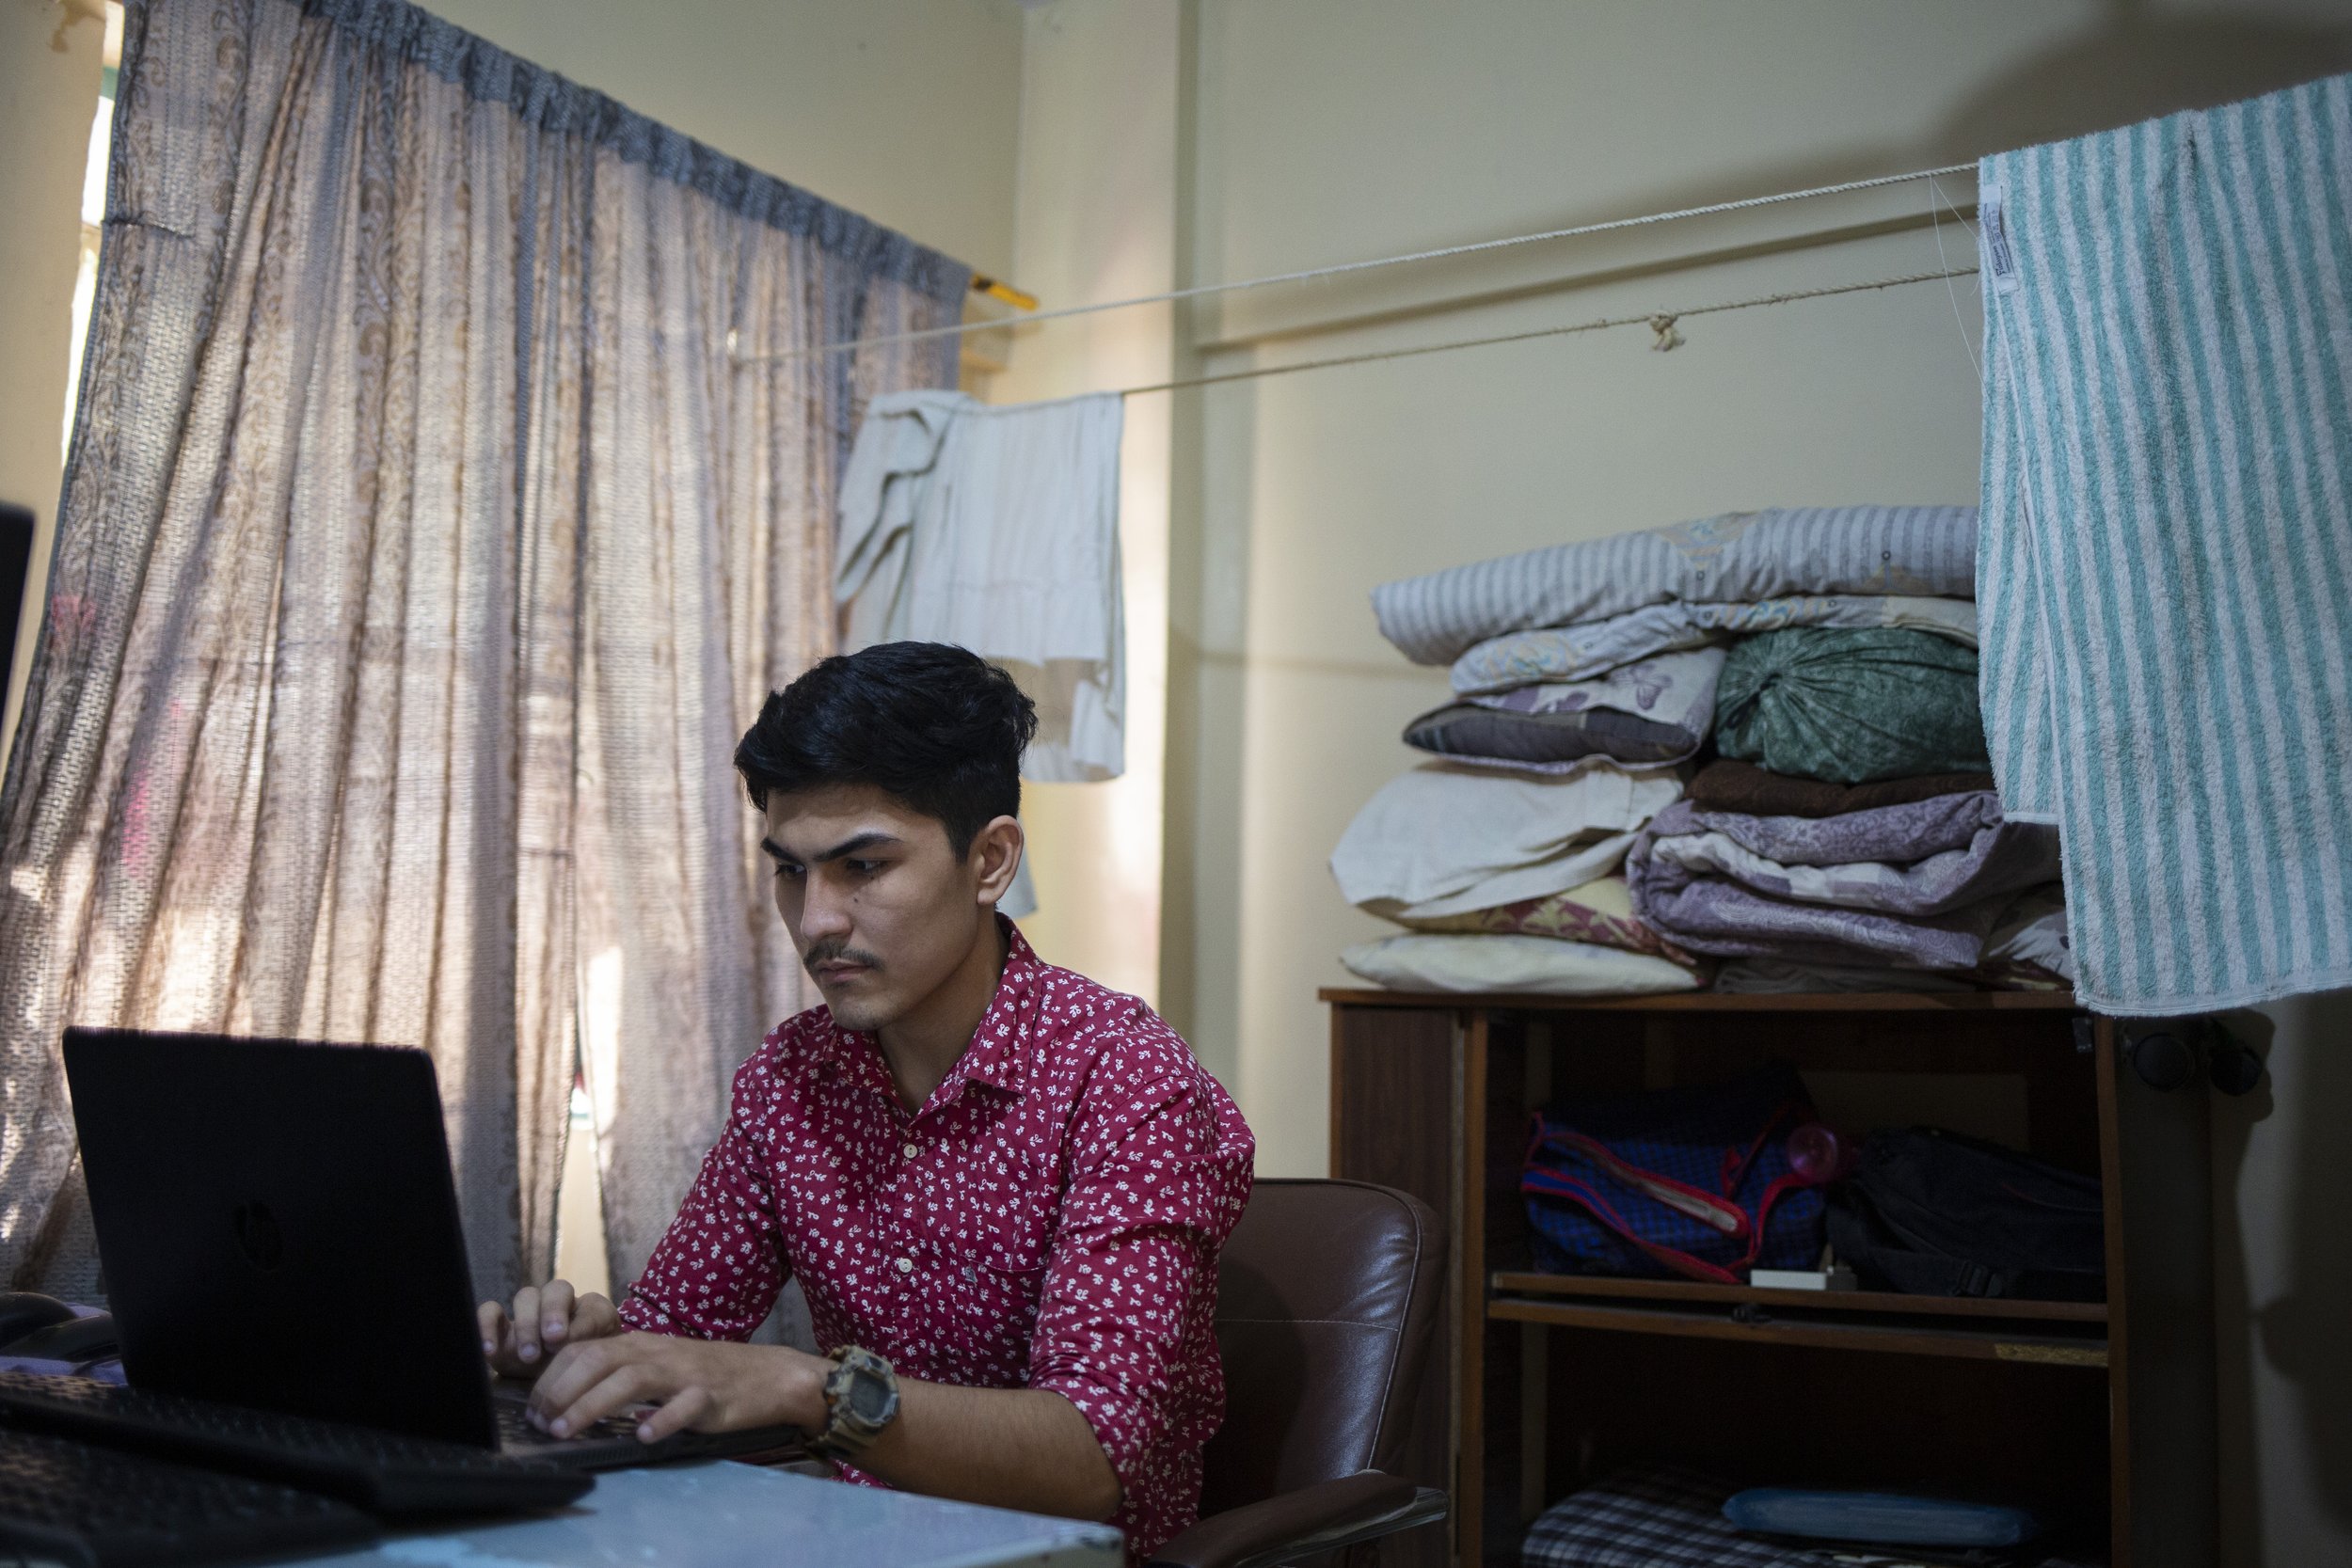  Madad Ali, a web developer, checking the computer to see if he has received any assignments. 